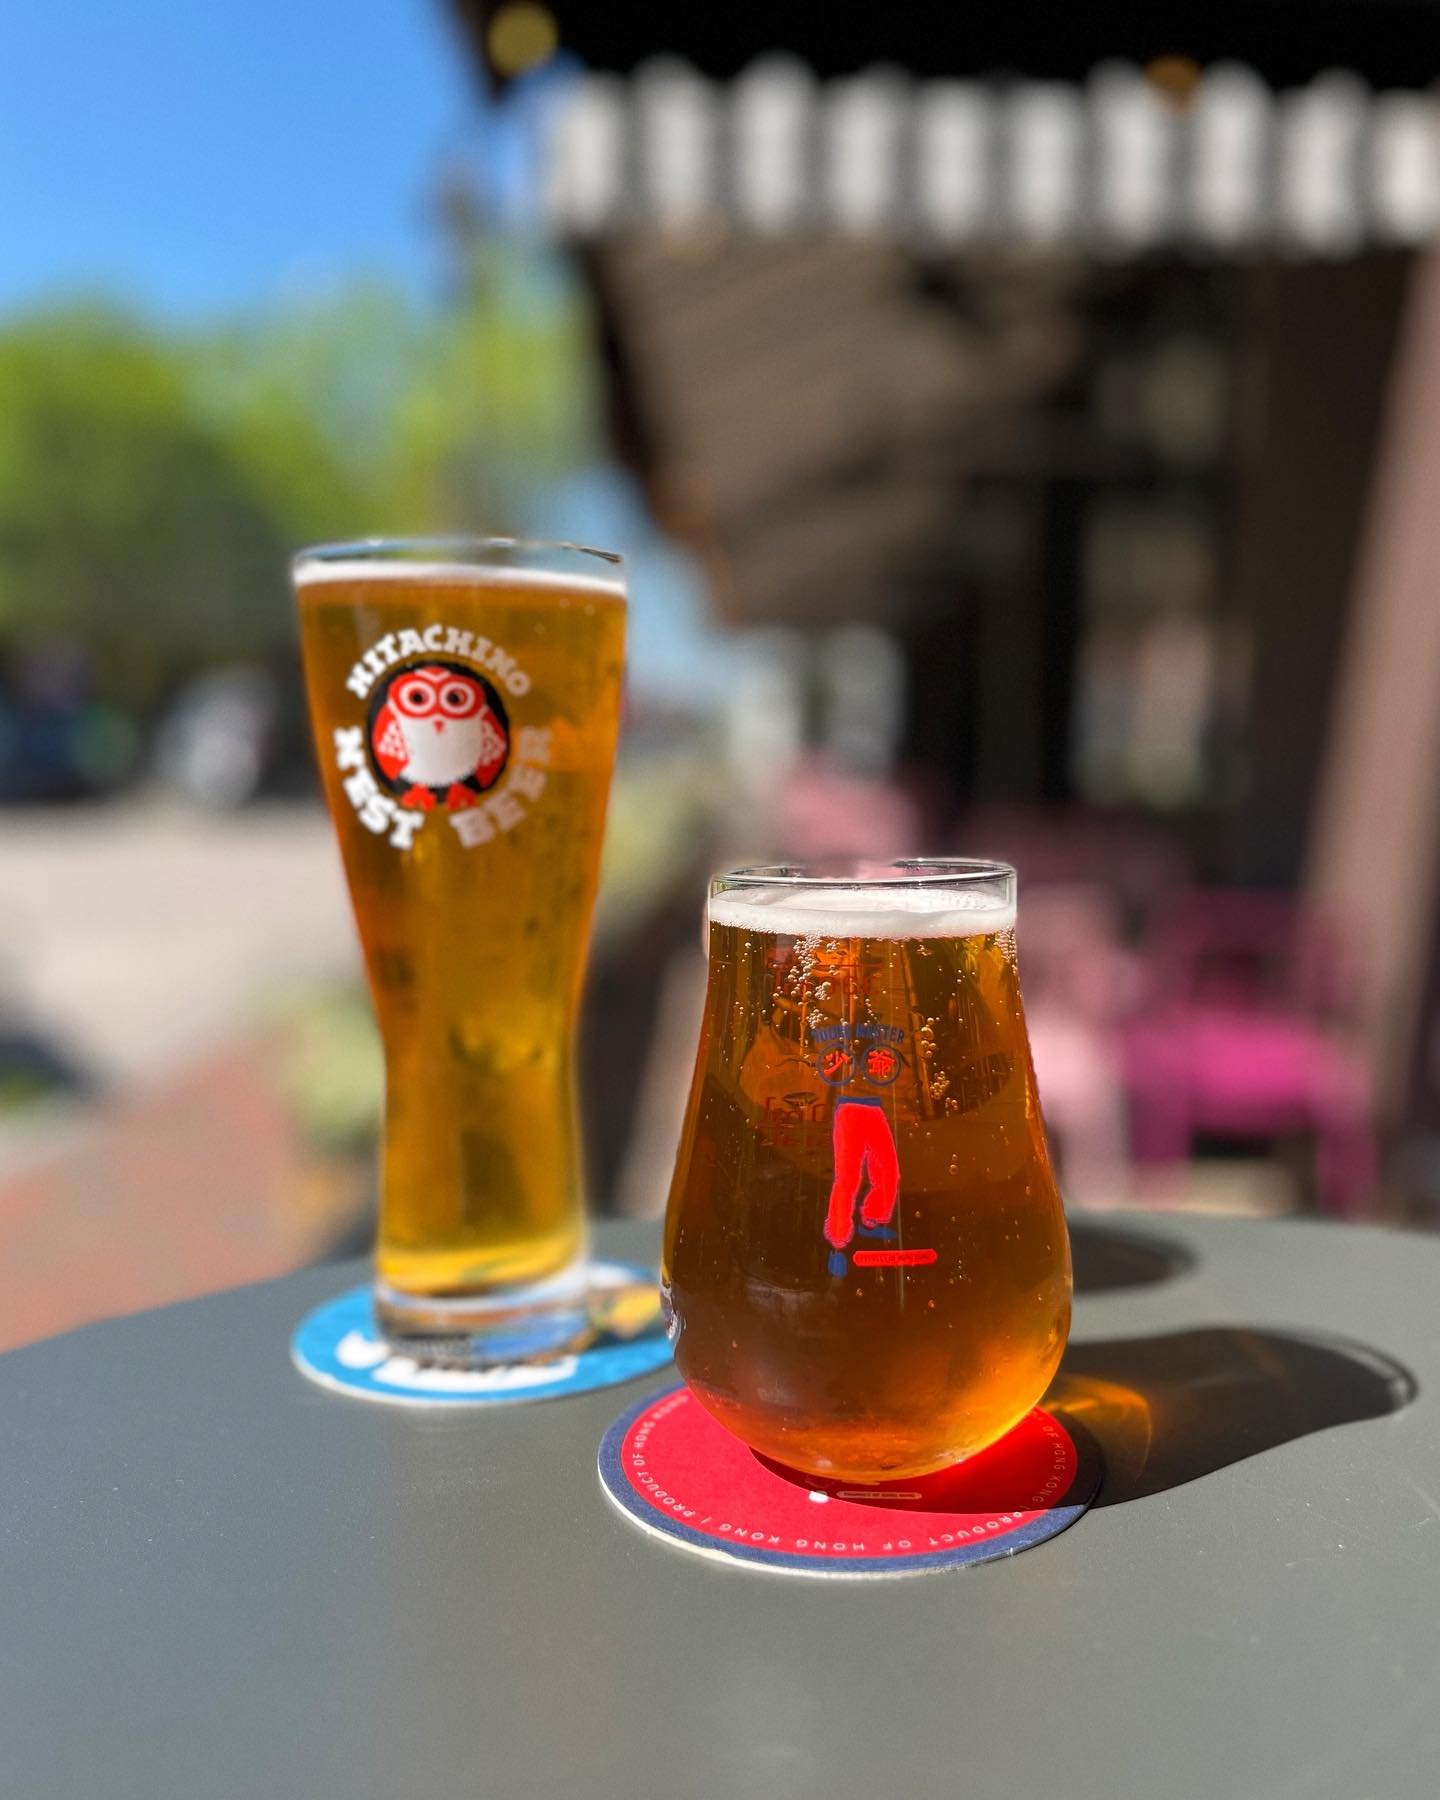 Thirsty? $2 off all of our Asian draft beers all night tonight! 

It&rsquo;s perfect patio weather 😘✨ Open 4-9pm!

#thirstythursday #beer #beerlover #beerme #hitachino #youngmaster #happyhour #rvadrinks #rva #richmondva #rvaartsdistrict